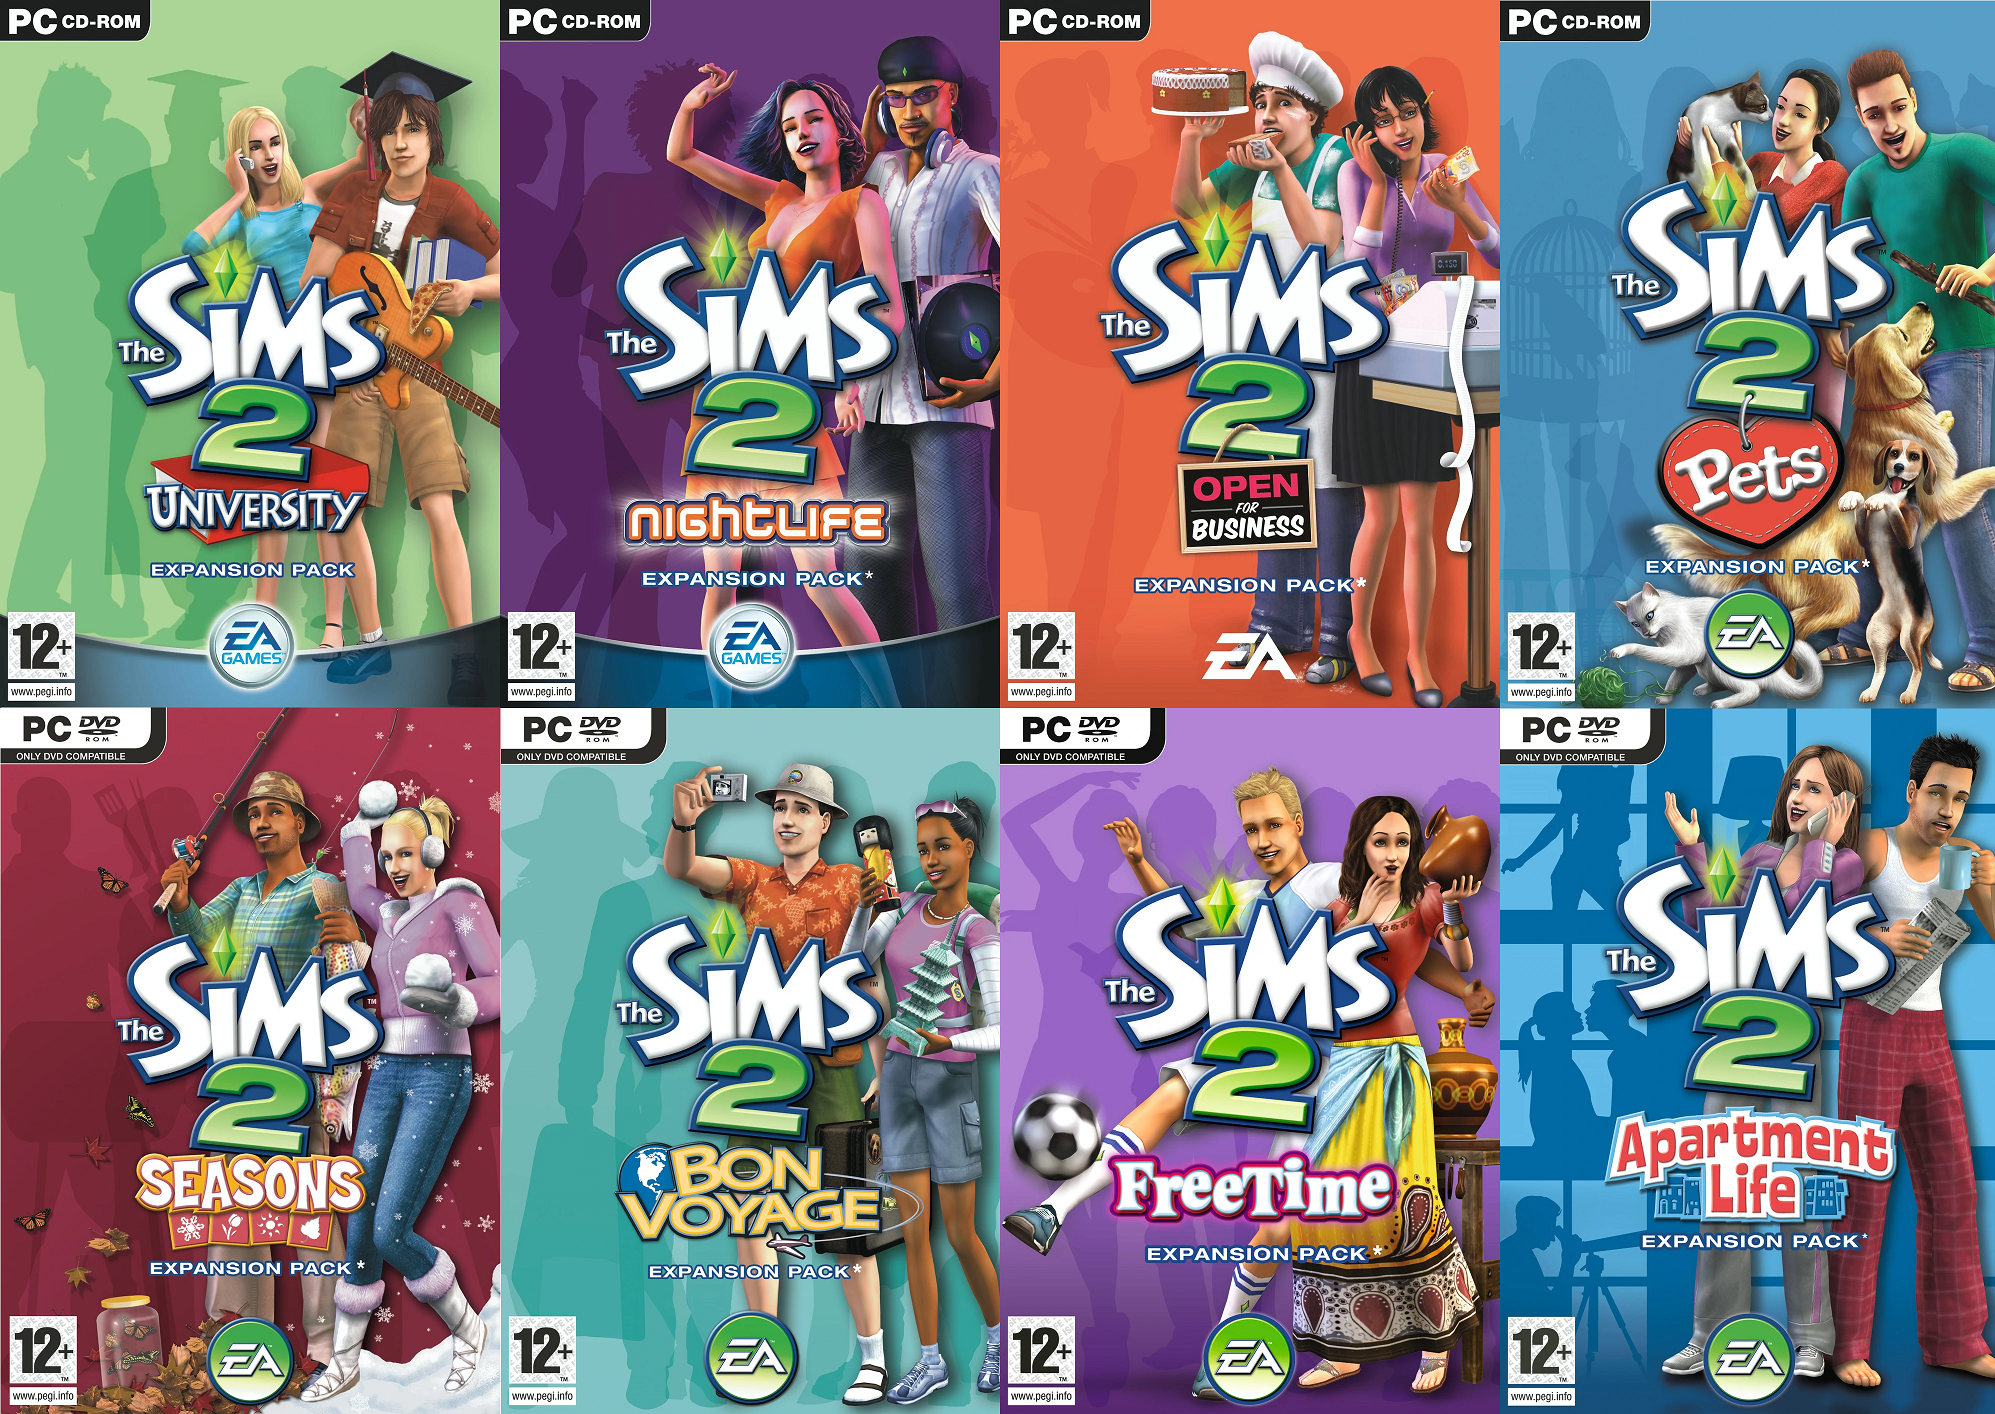 sims 2 expansion packs release dates